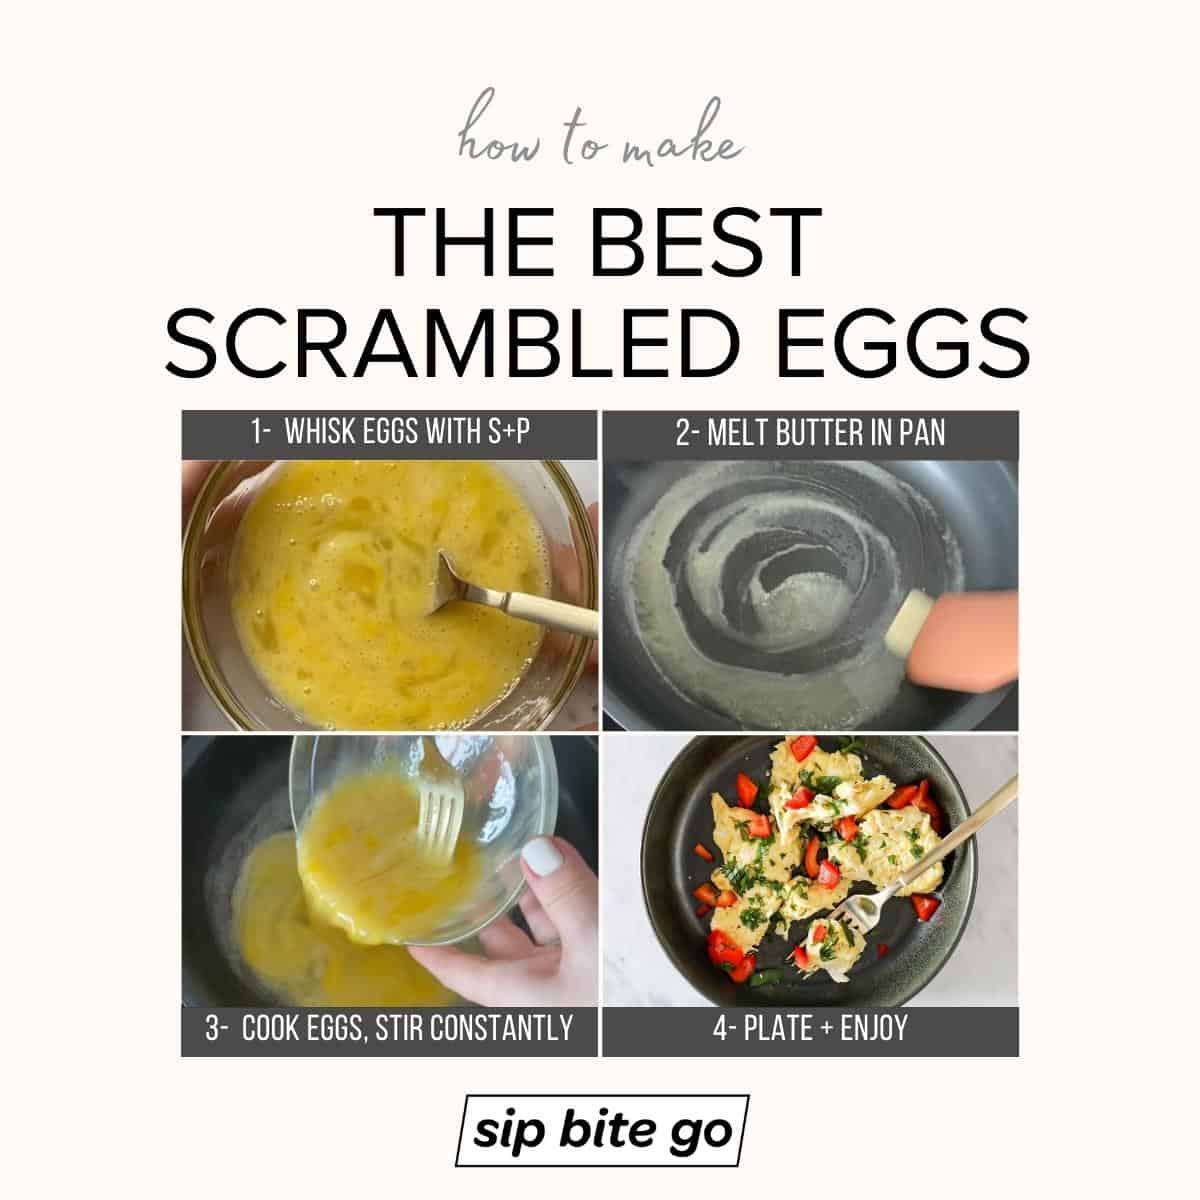 Infographic demonstrating how to scramble eggs so they're fluffy and perfect with captions and recipe photo collage